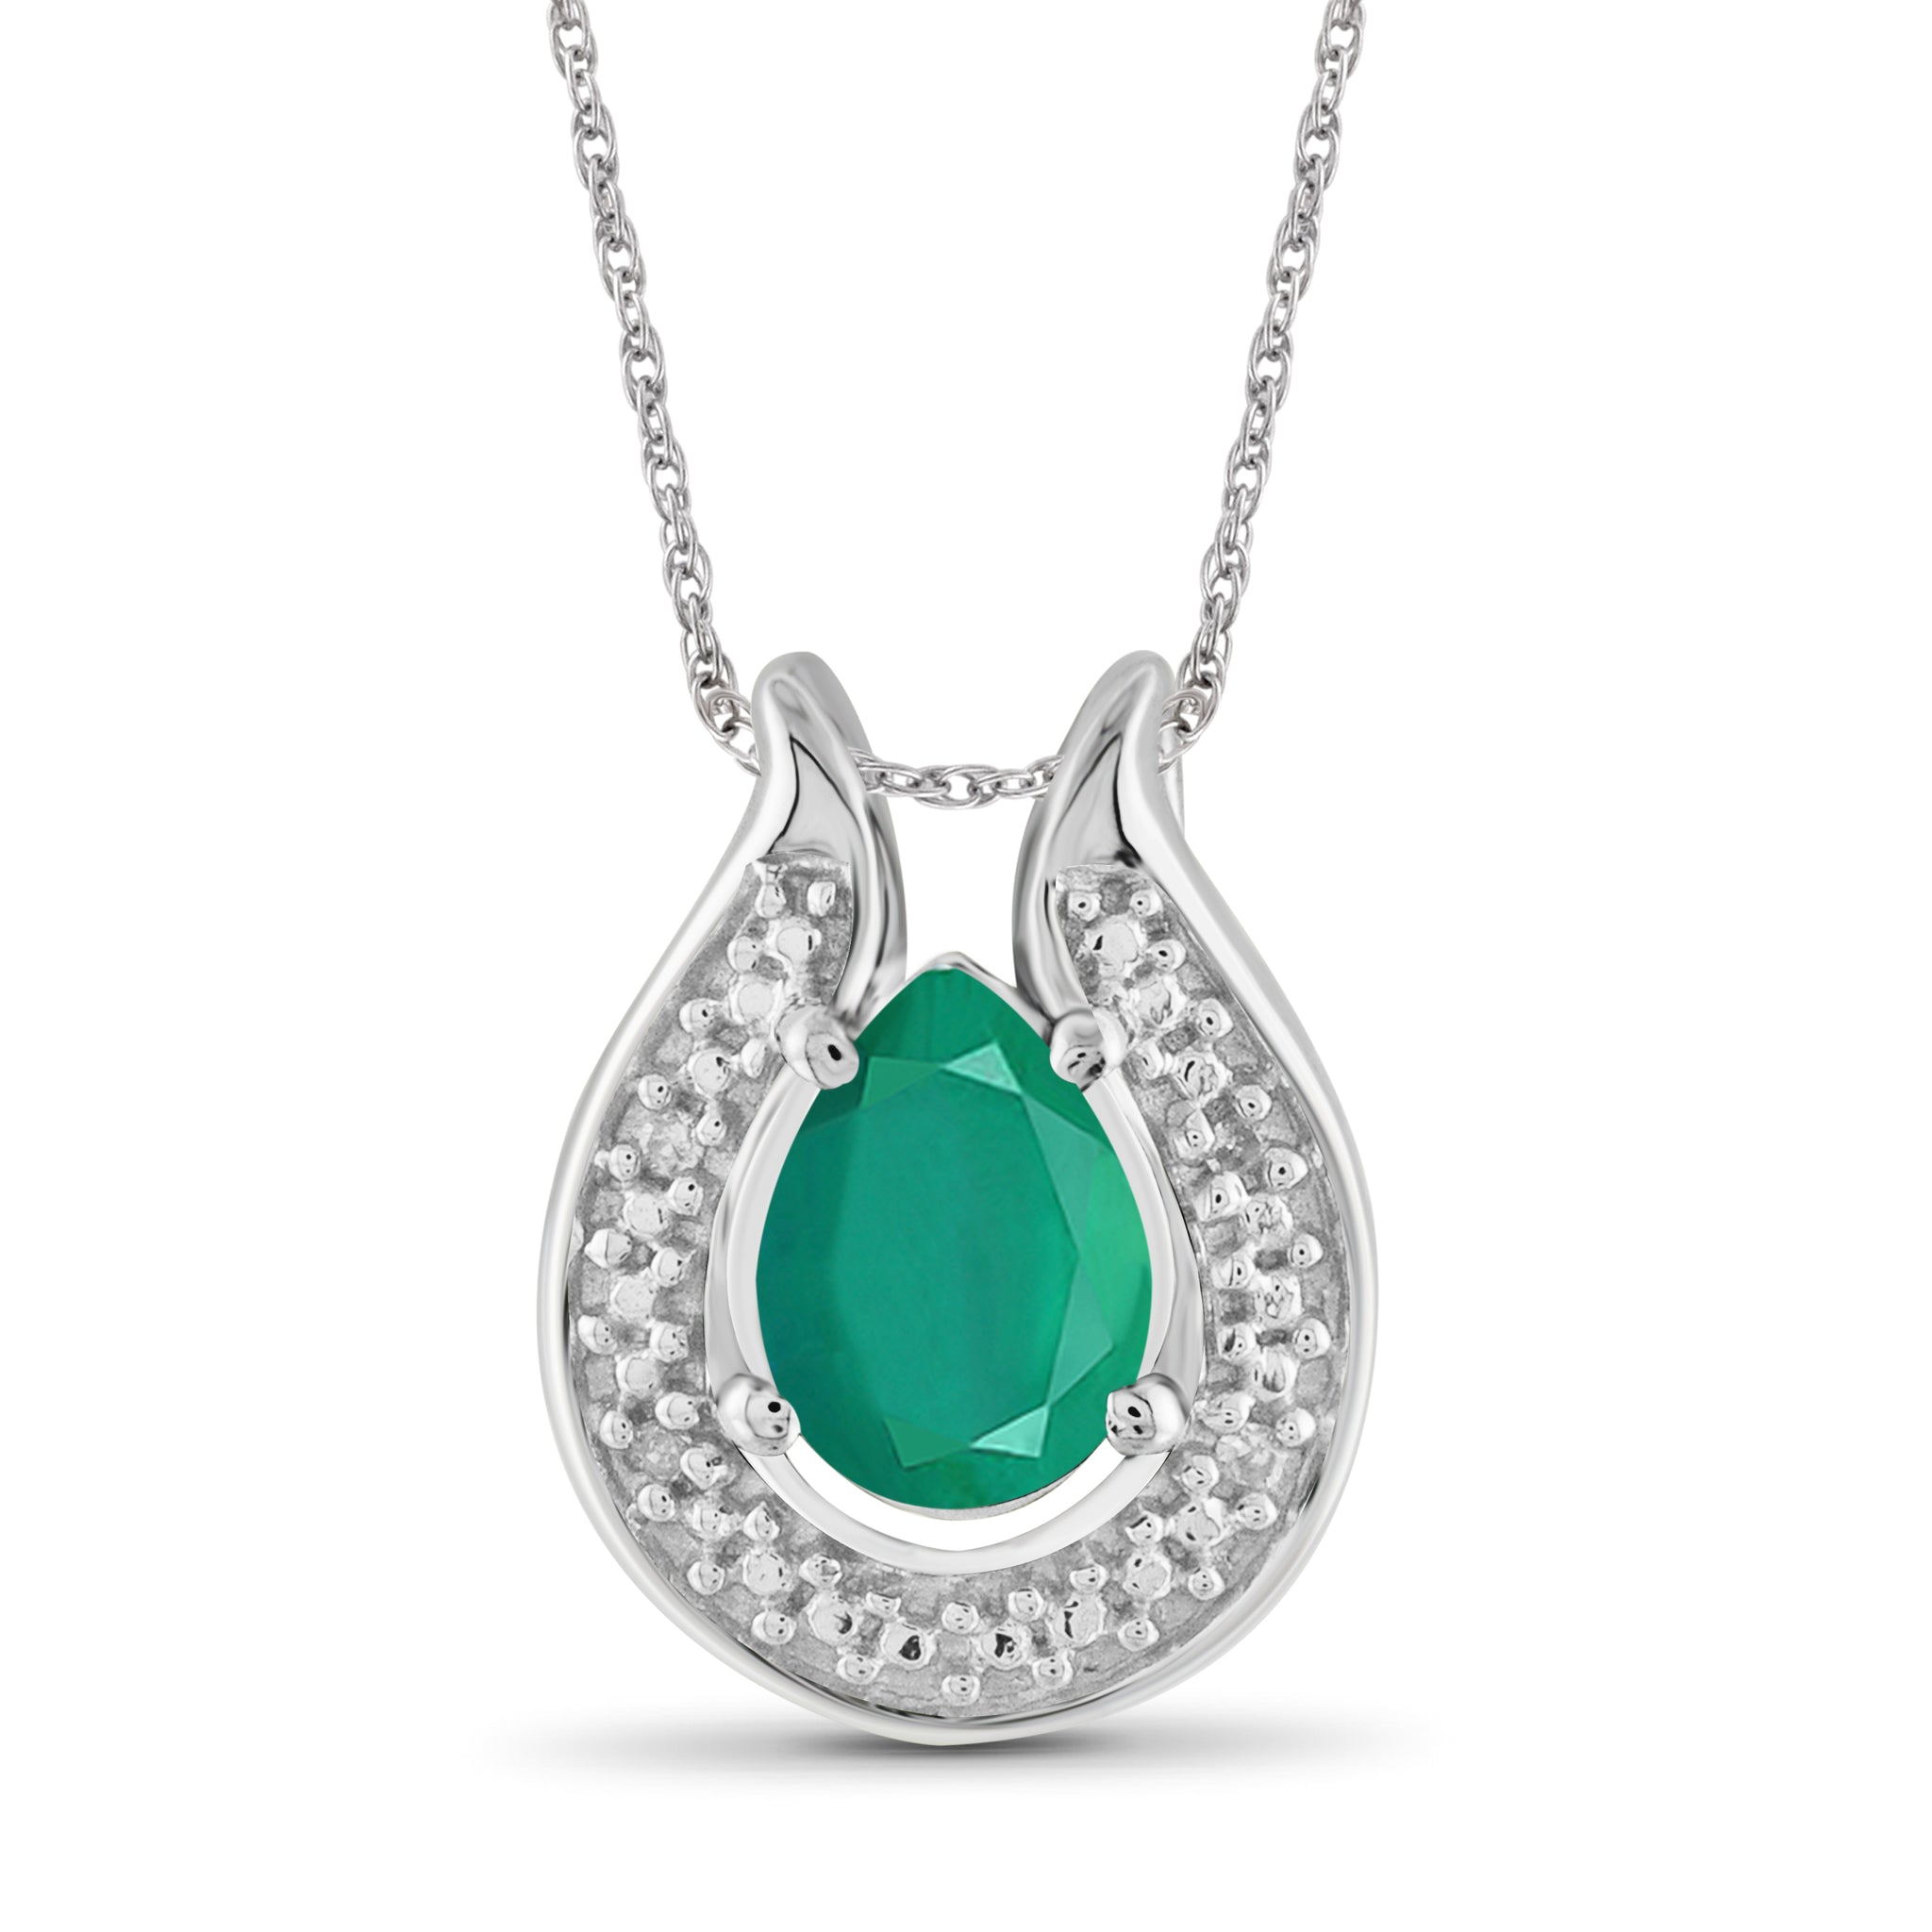 JewelonFire 0.70 Carat T.G.W. Genuine Emerald and Accent White Diamond Sterling Silver Pendant - Assorted Colors